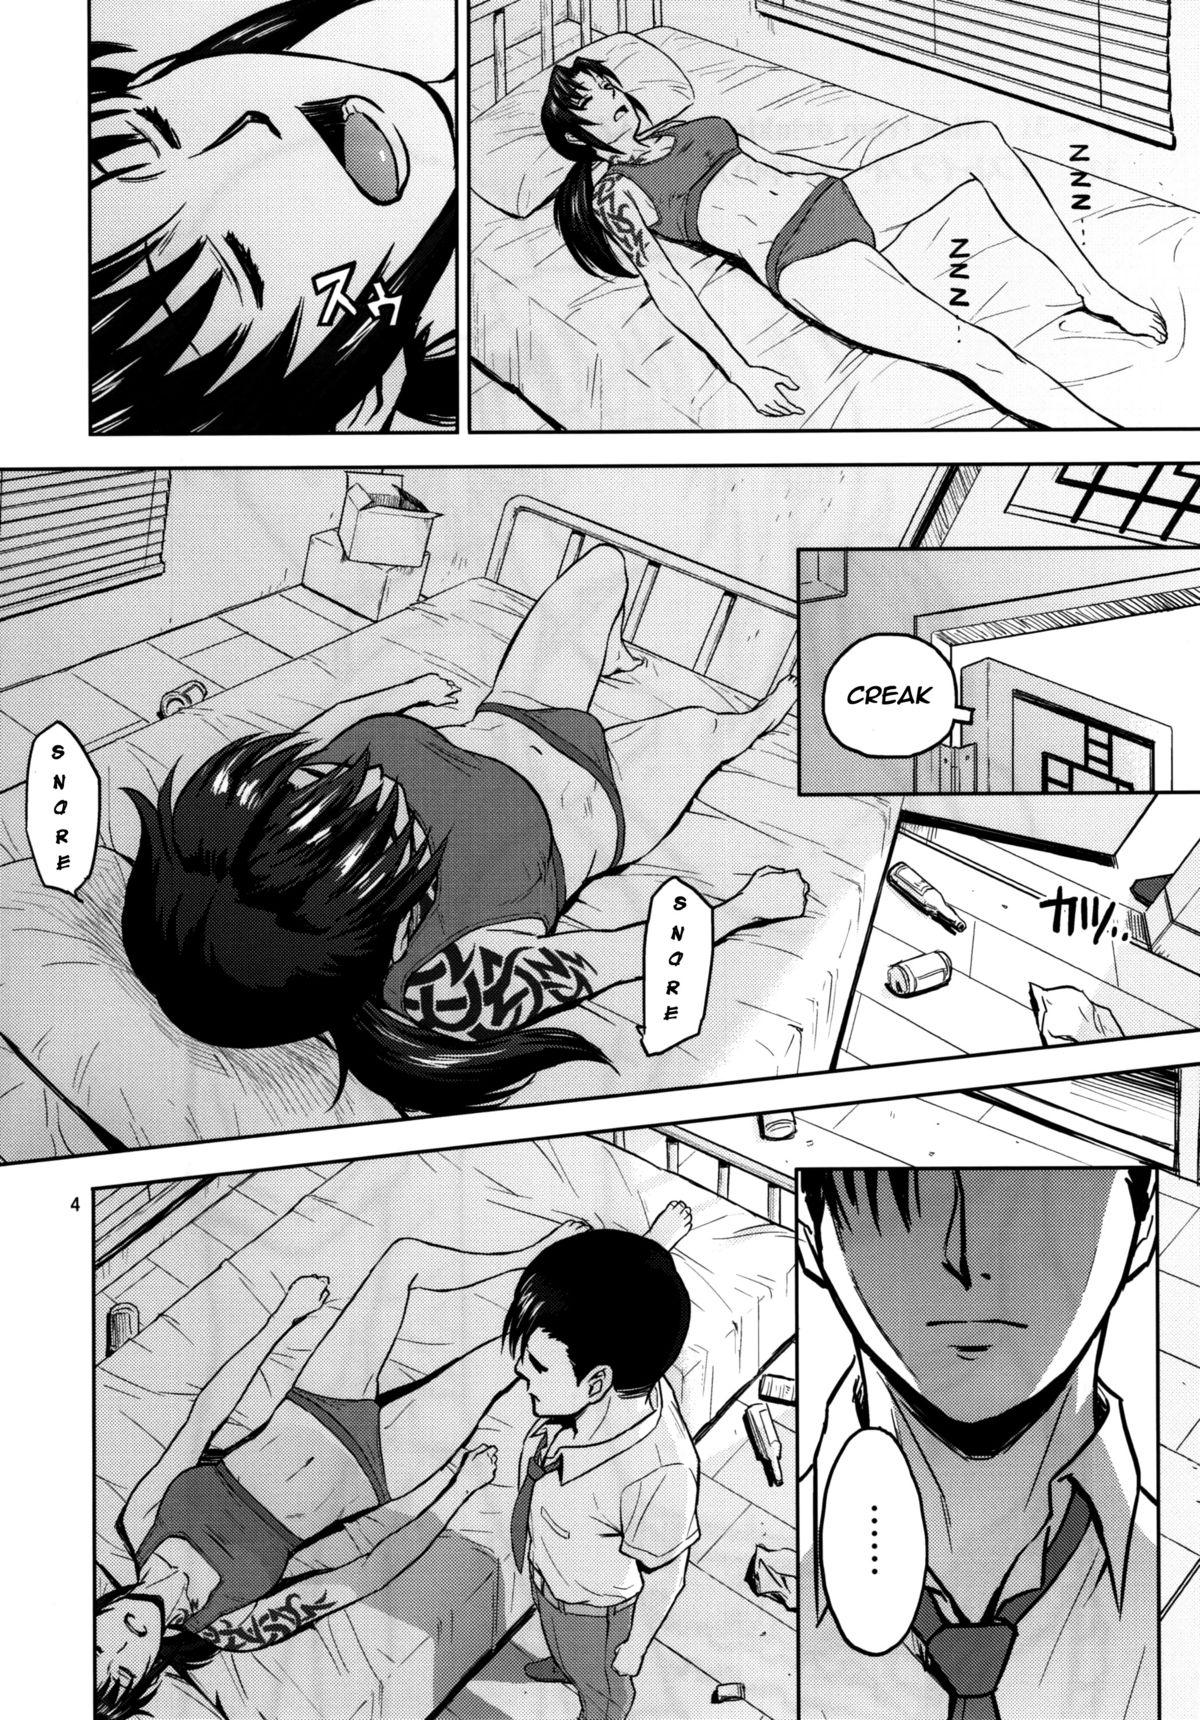 With Sick from drinking - Black lagoon Humiliation Pov - Page 4